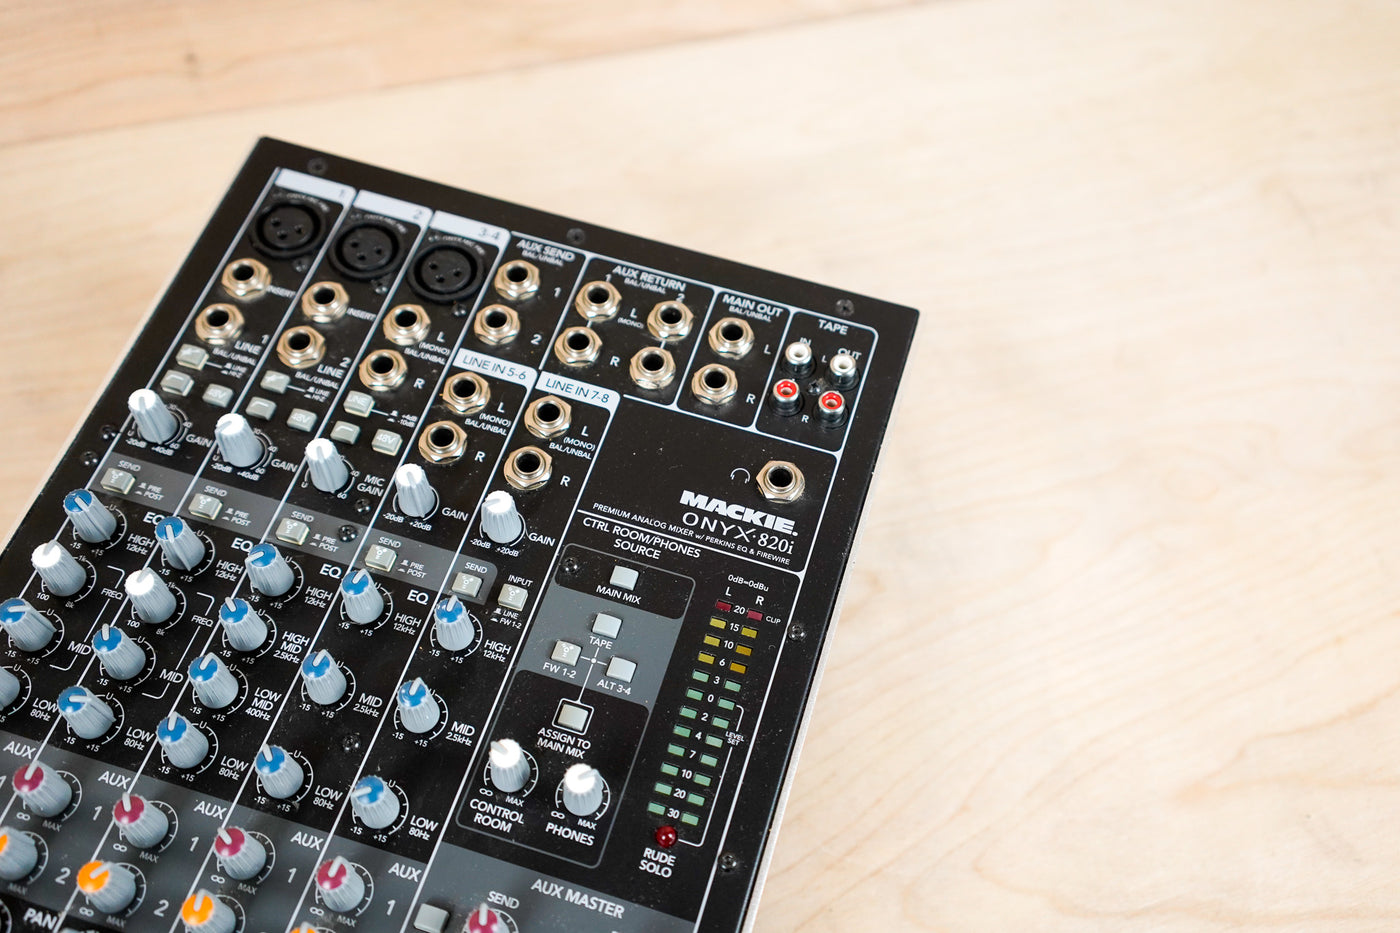 Mackie Onyx 820i 8-Channel Firewire Interface and Analog Mixer